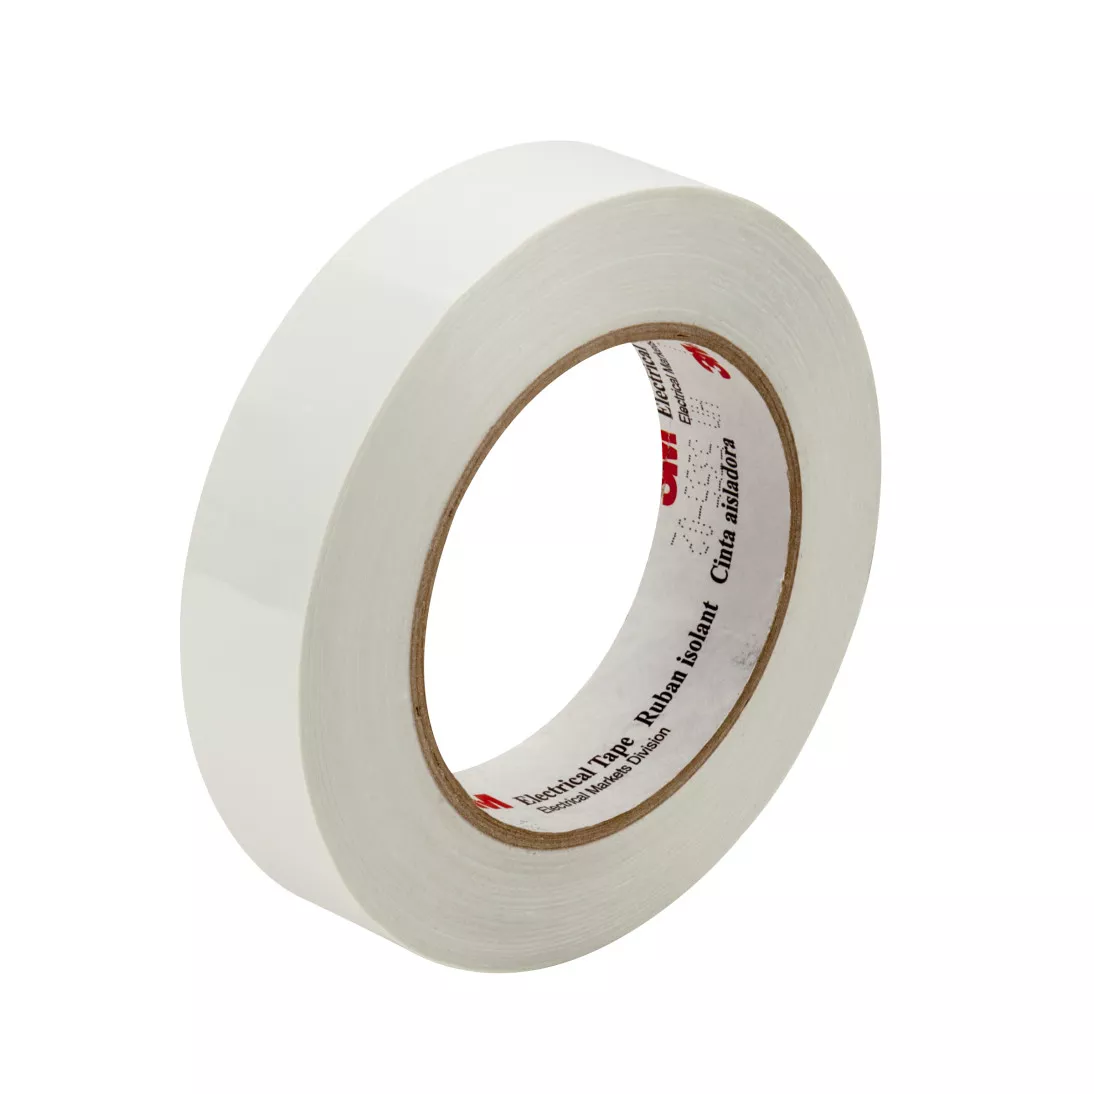 3M™ 1 Tape Log Untrimmed 1 Side on Plastic Core, 23 3/4 in x 72 yd, 1
Roll/Case